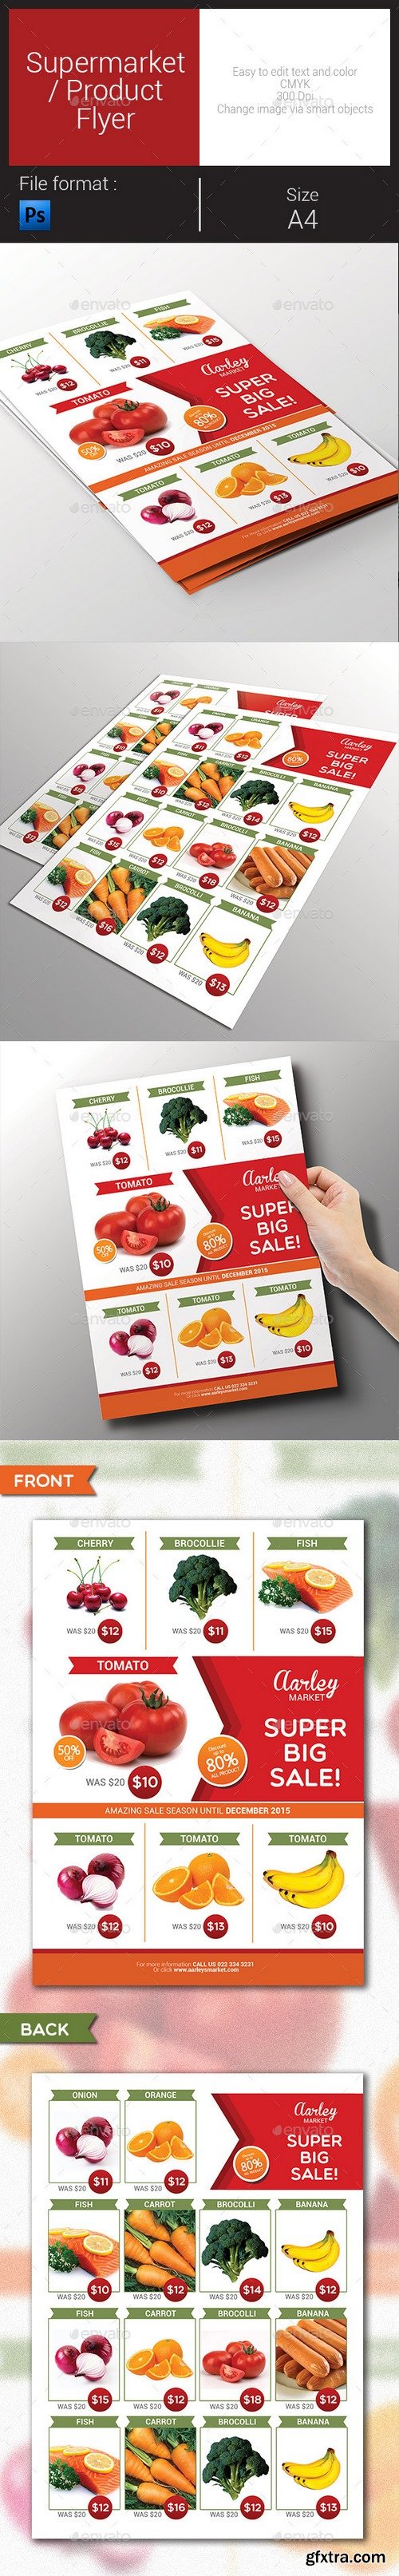 Graphicriver - Supermarket / Product Flyer 9164447